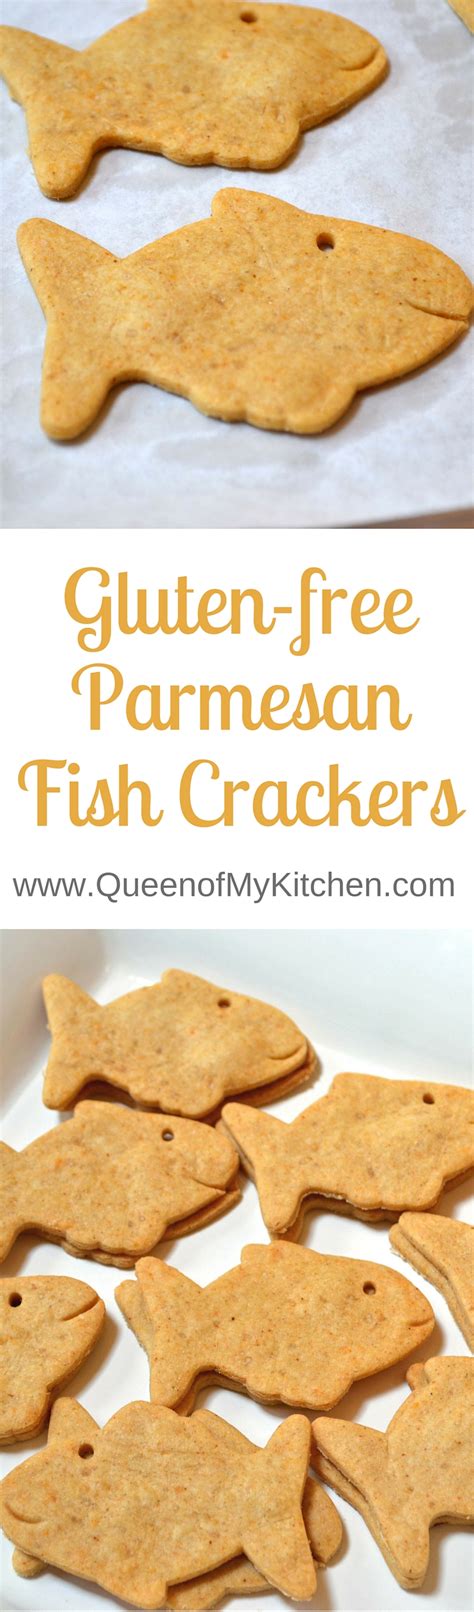 Make sure you check the label of the chicken broth. Gluten Free Parmesan Fish Crackers | Recipe | Fish ...